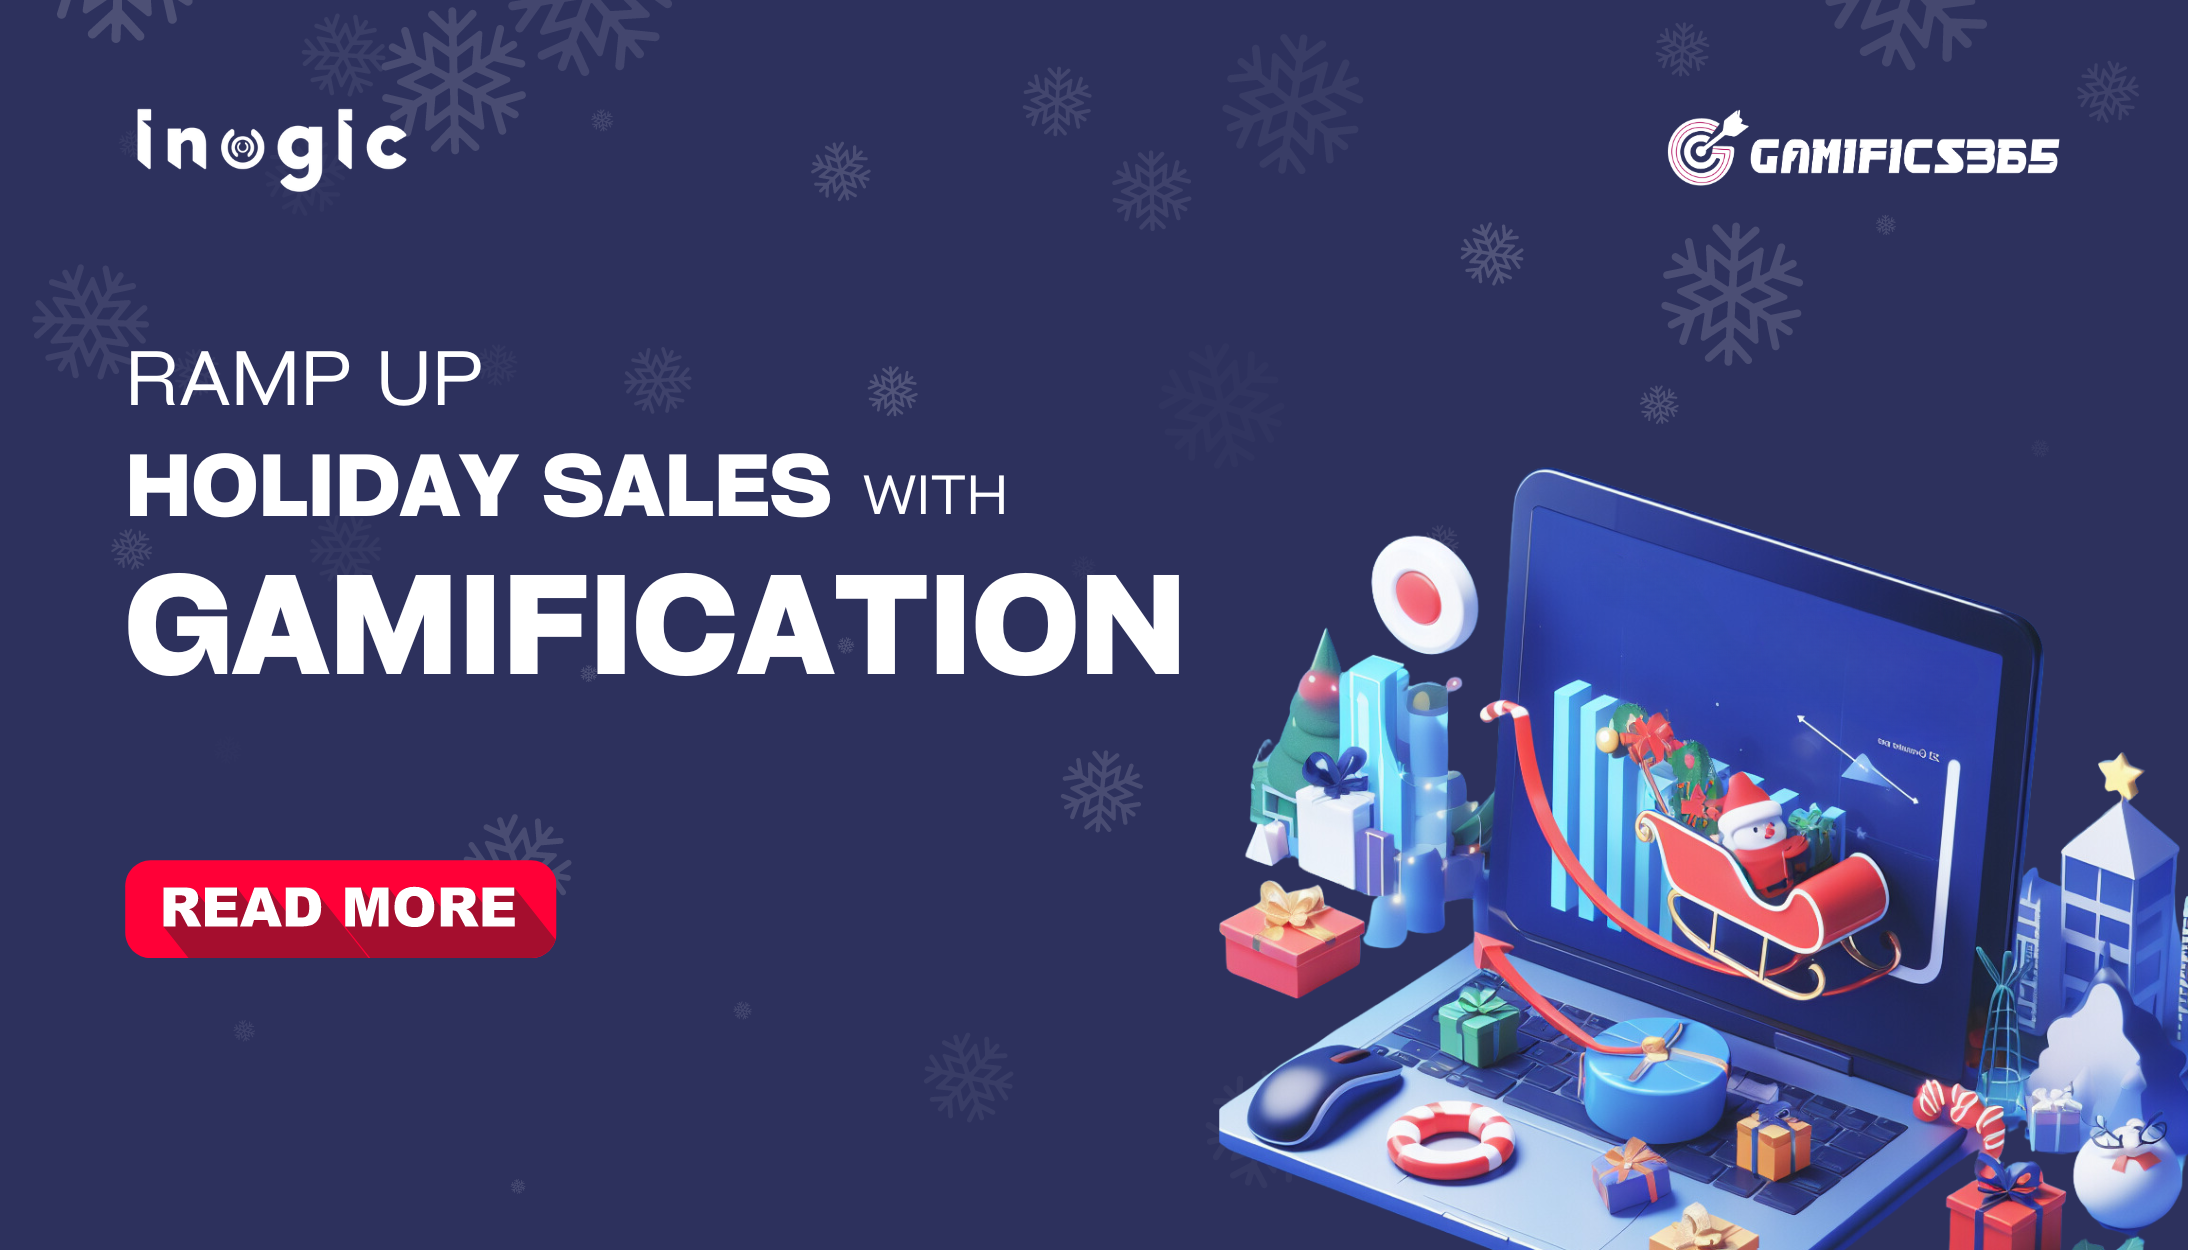 Ramp Up Holiday sales with Gamification within Microsoft Dynamics 365 CRM